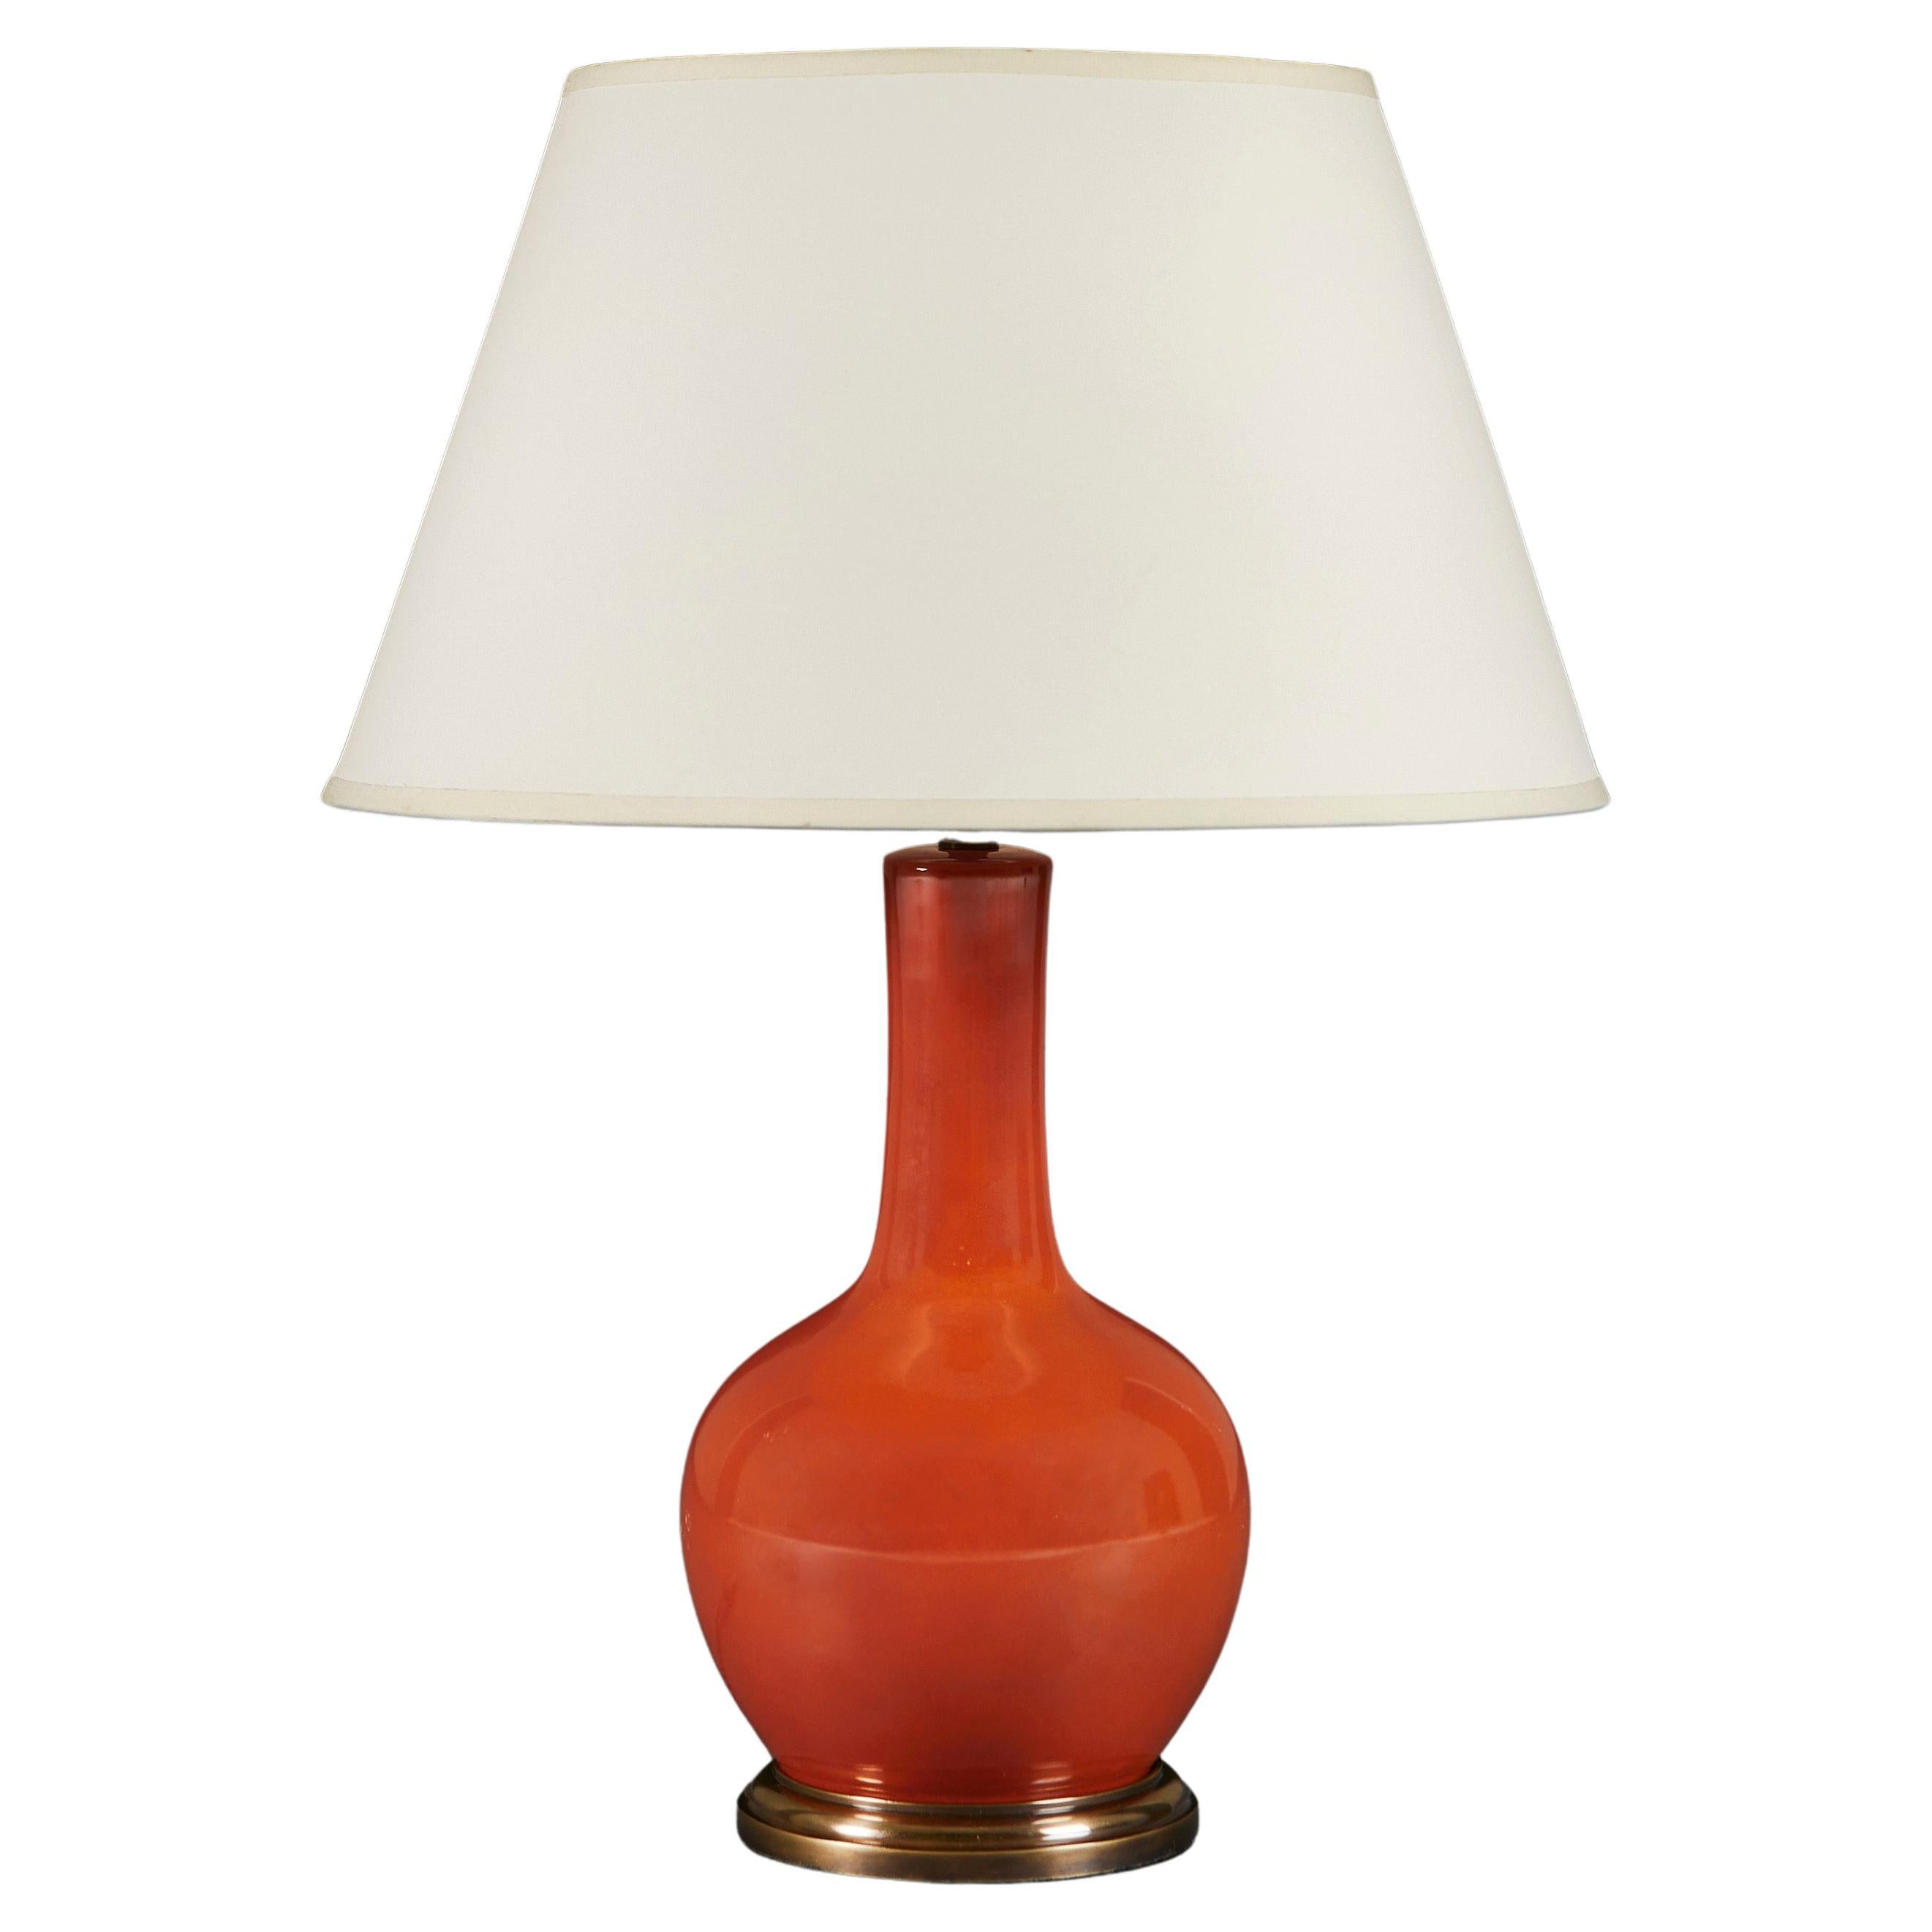 A Red Umber Monochrome Lamp For Sale